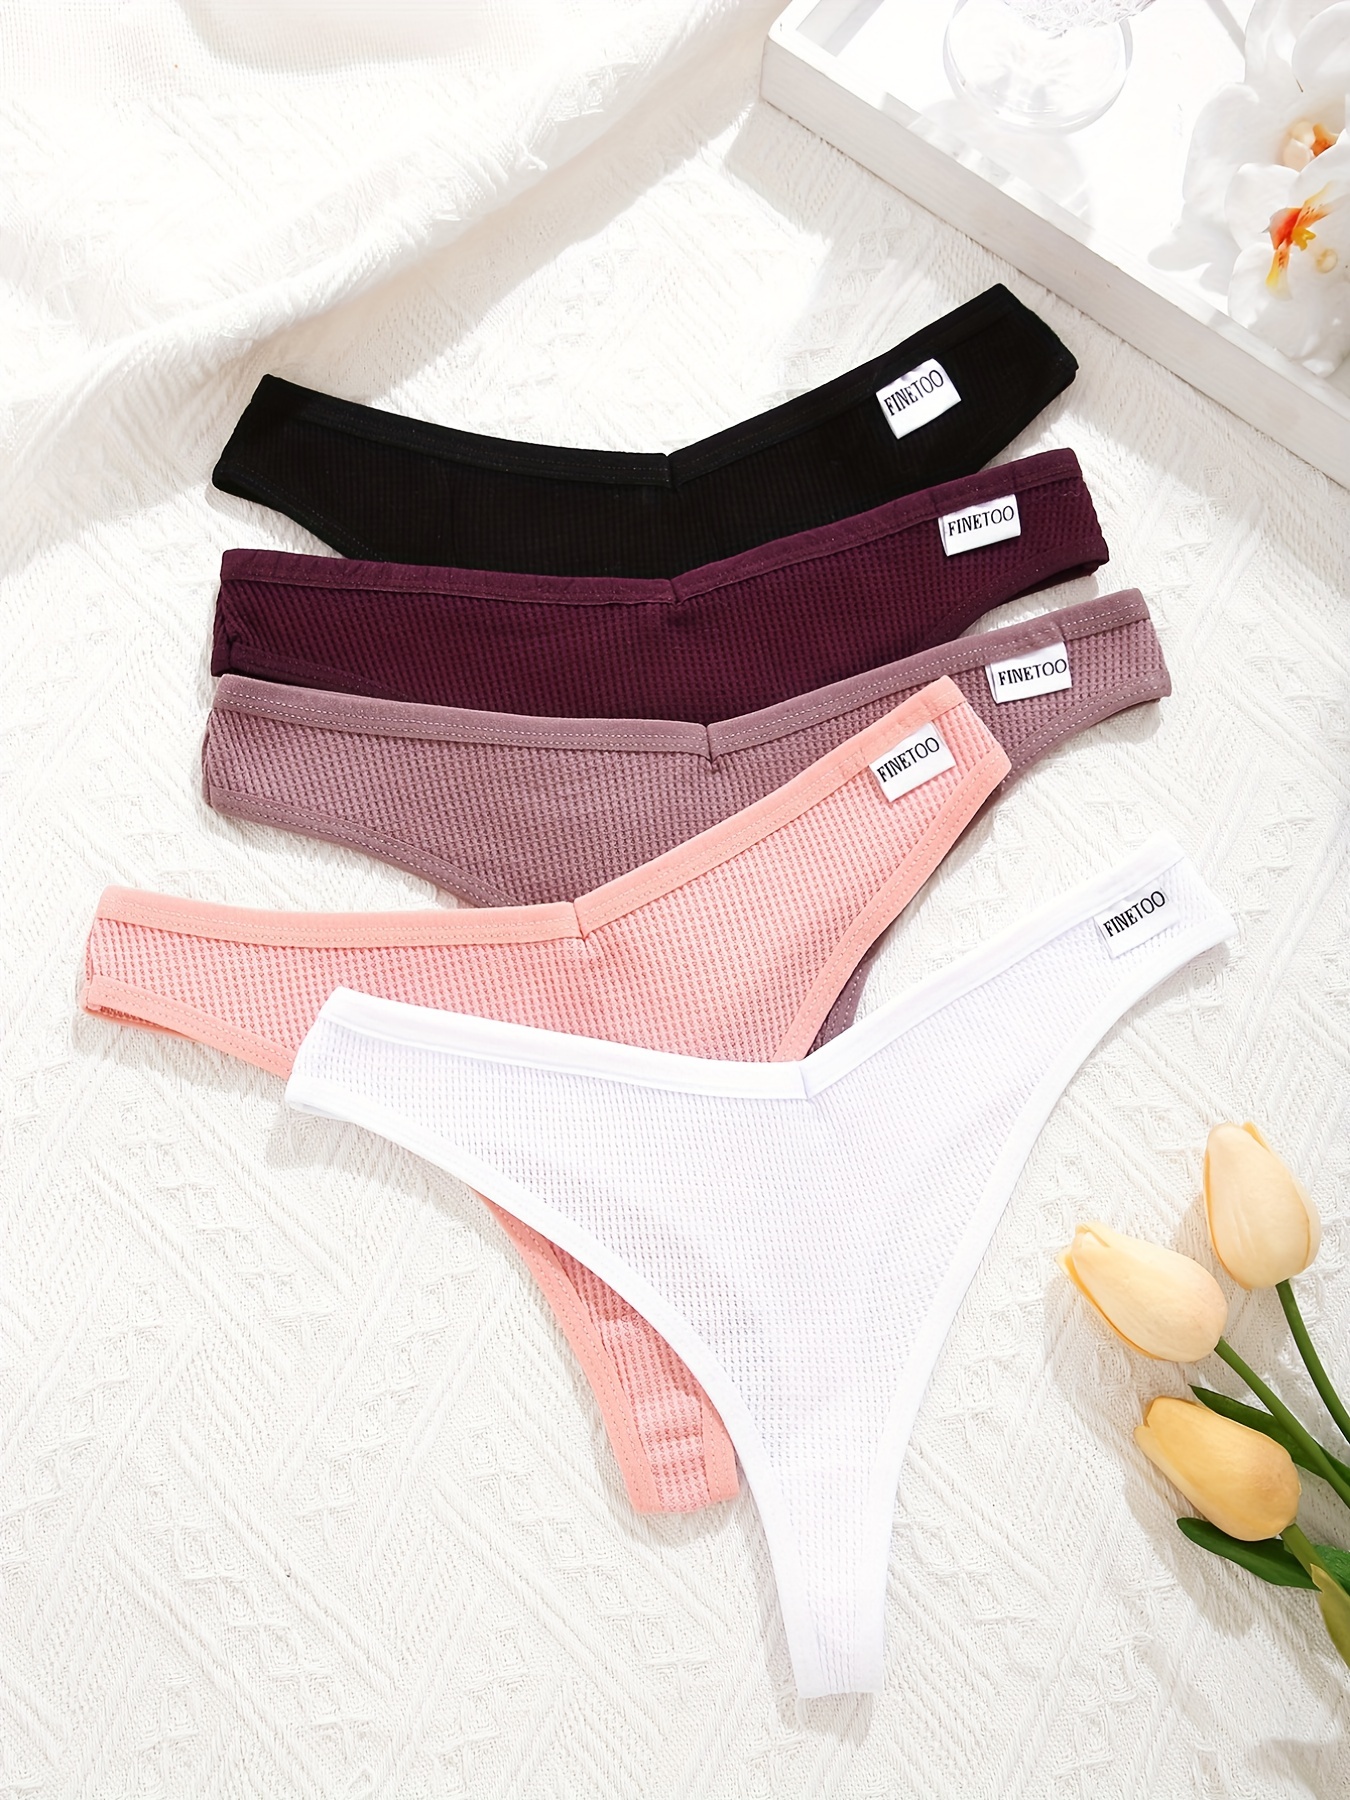 Colorful Cotton Panties Assorted Colors Soft Stretchy Thongs